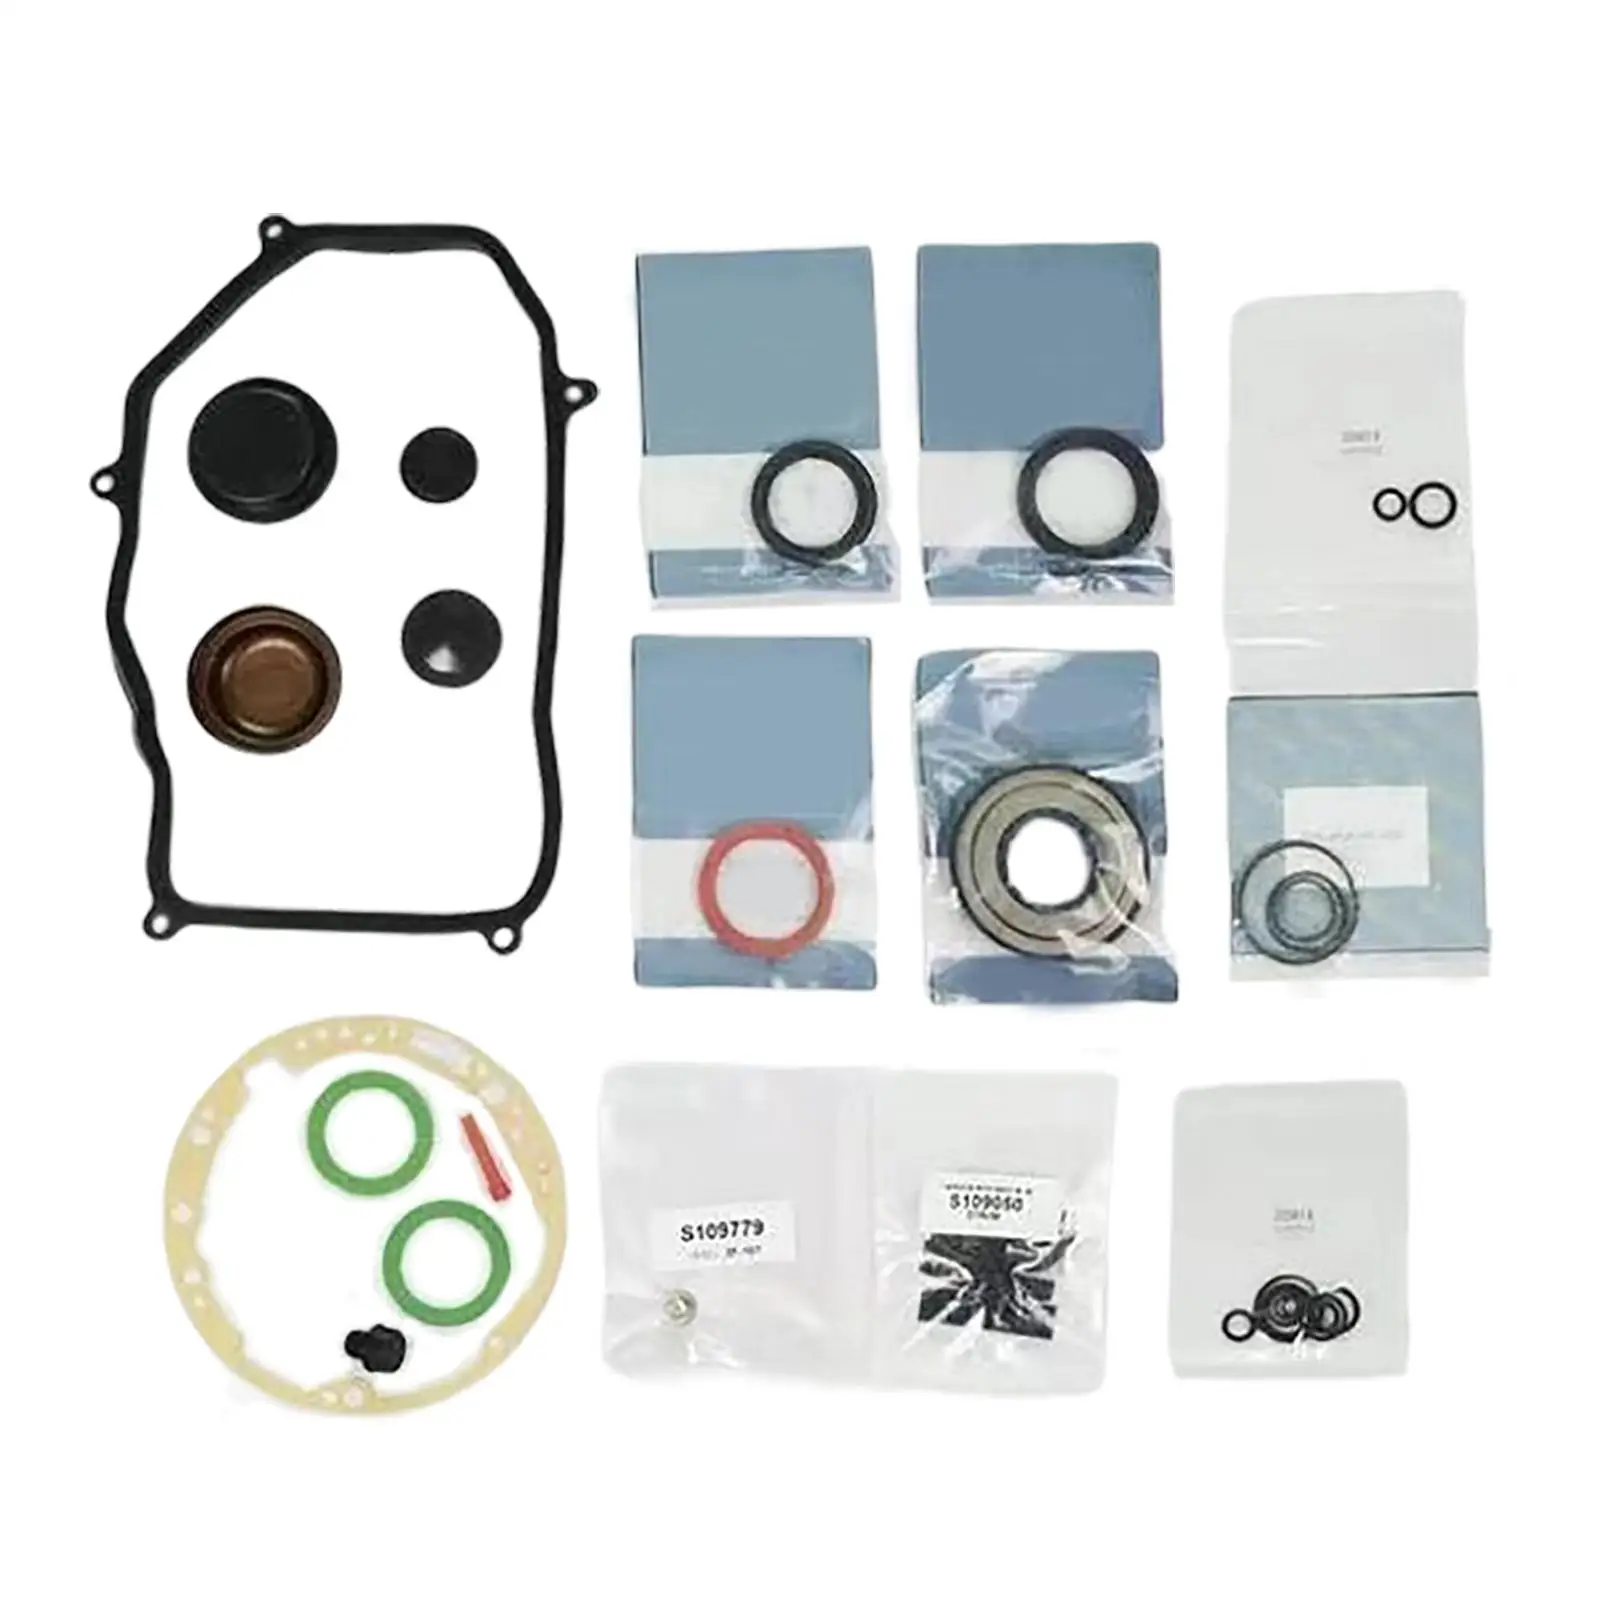 Automatic 01M  Transmission Seal  Kit Replacement Auto Gasket   for Trans MK4 1 001 Vehicle Parts